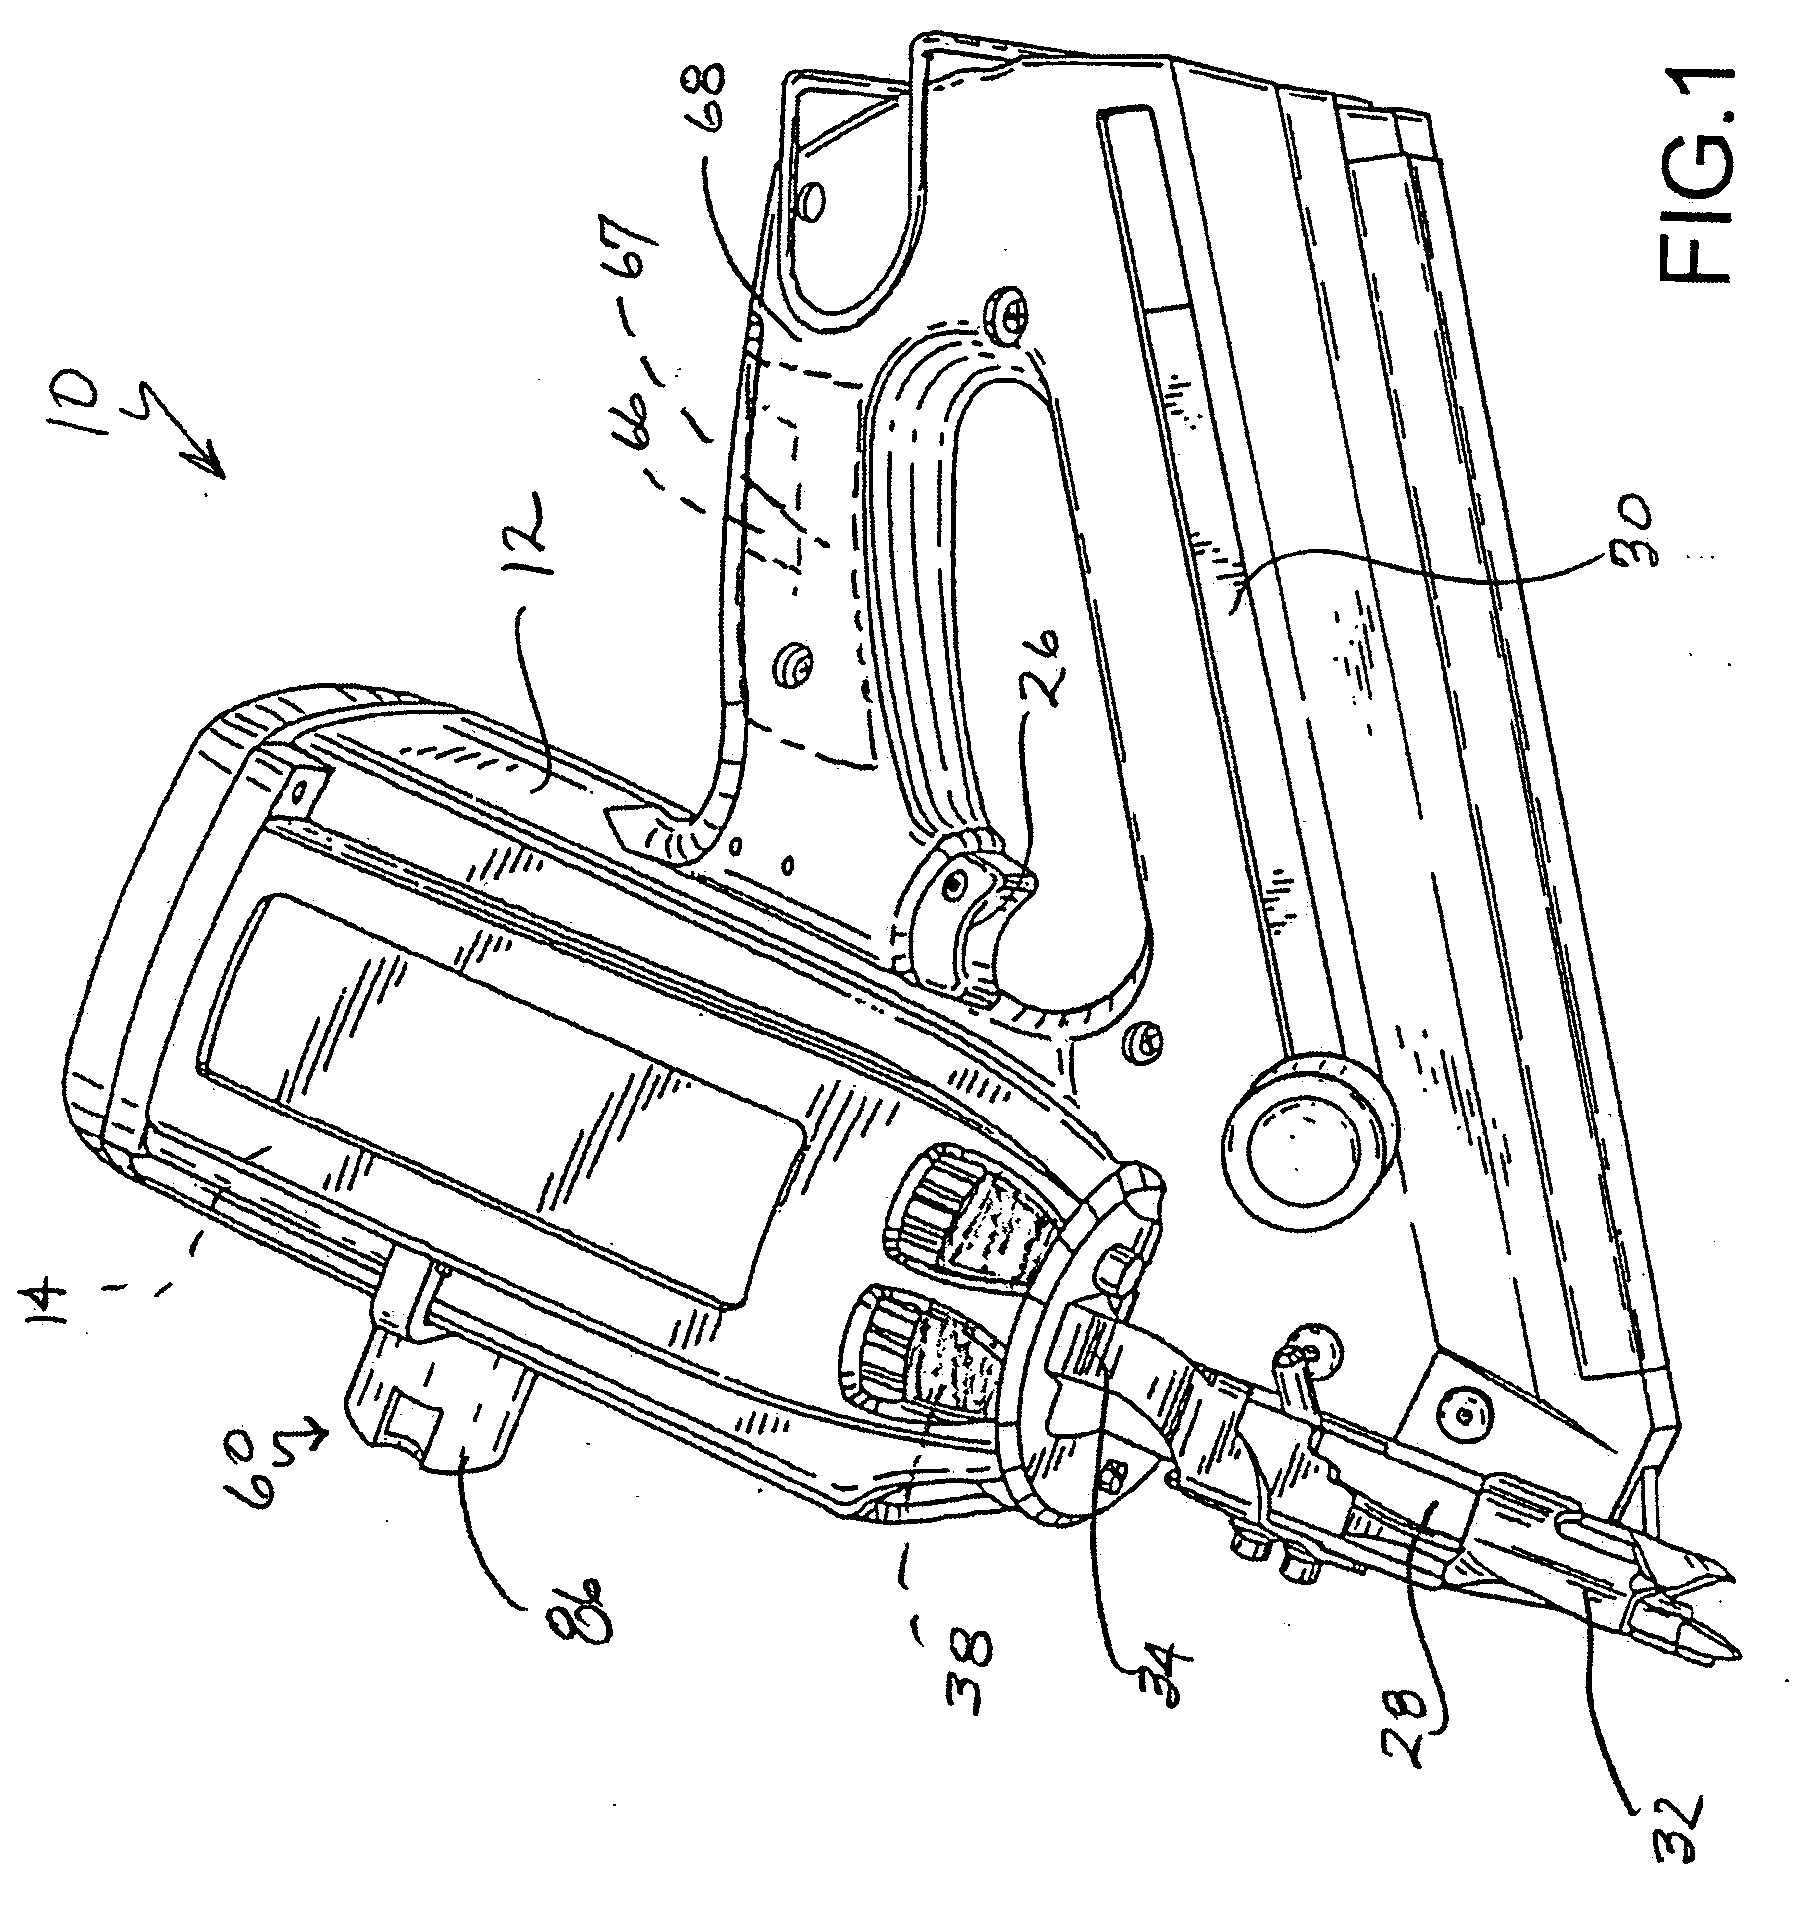 Exhaust system for combustion-powered fastener-driving tool